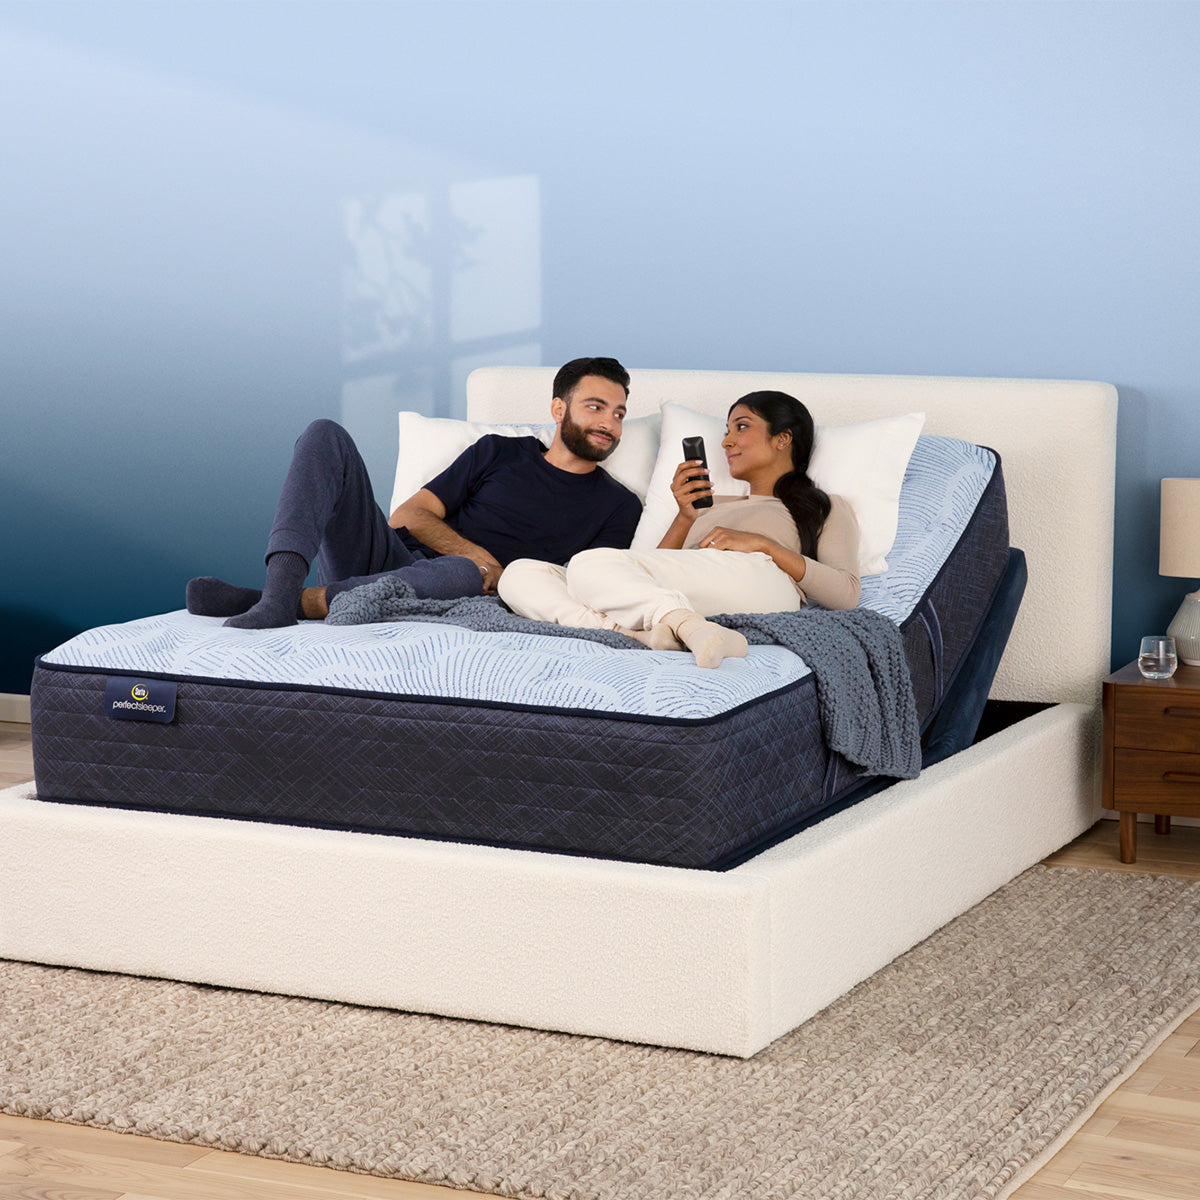 Couple playing on mattress elevated by a Serta Motion Essentials Adjustable Base